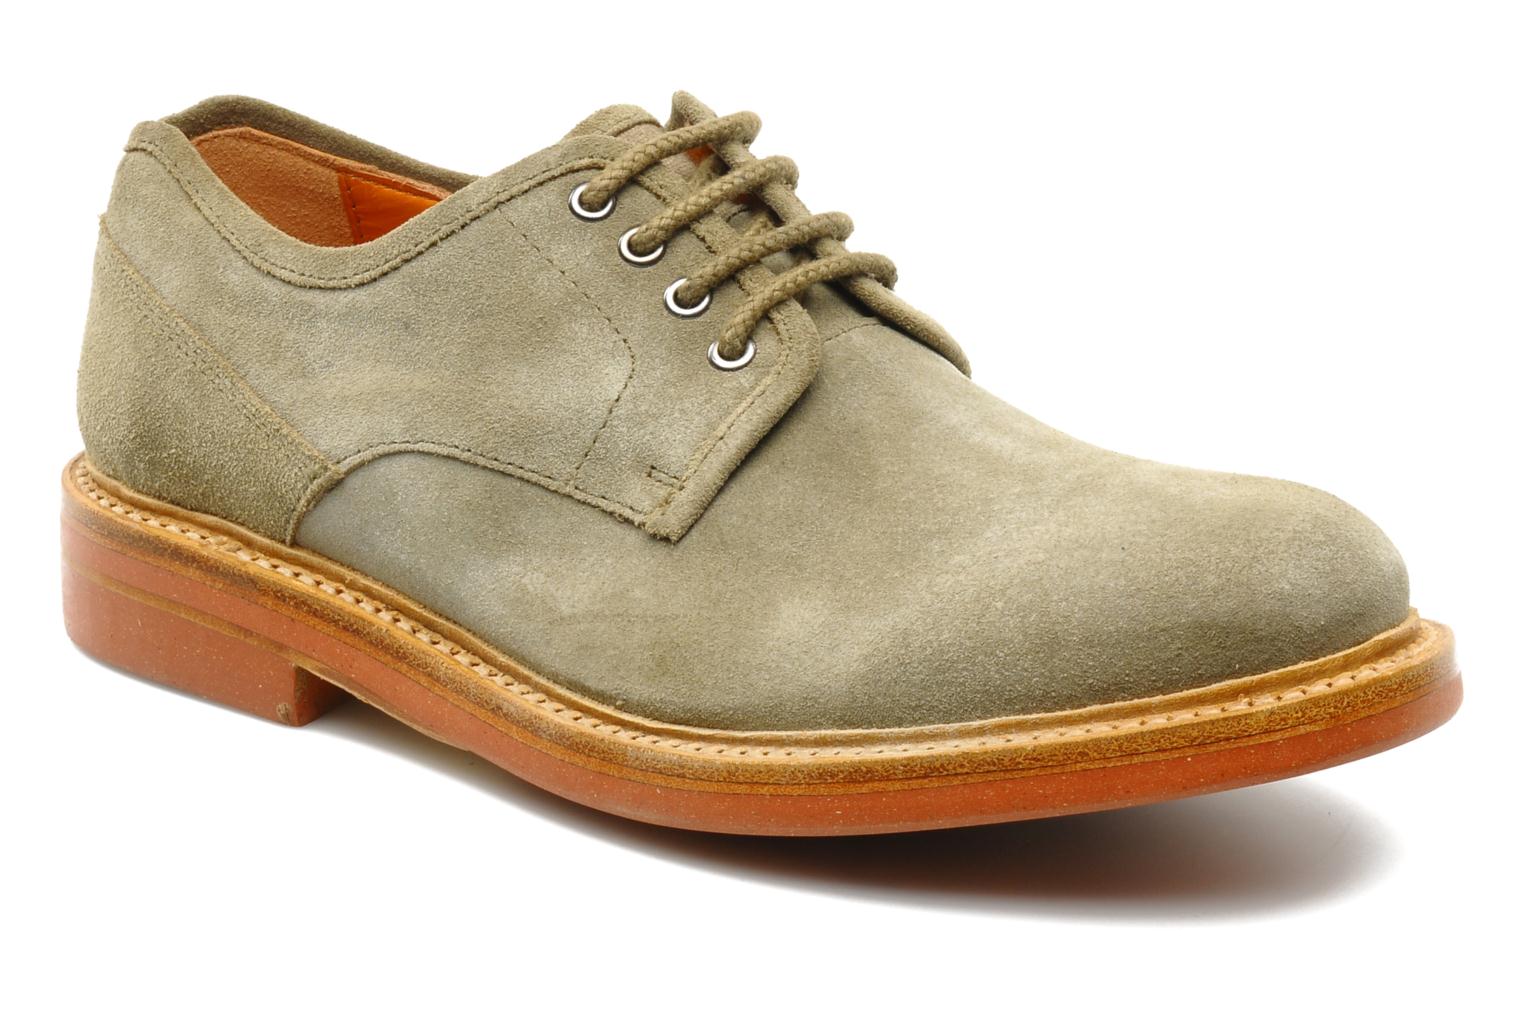 ONE True saxon Harwill Lace-up shoes in Beige at Sarenza.co.uk (89698)